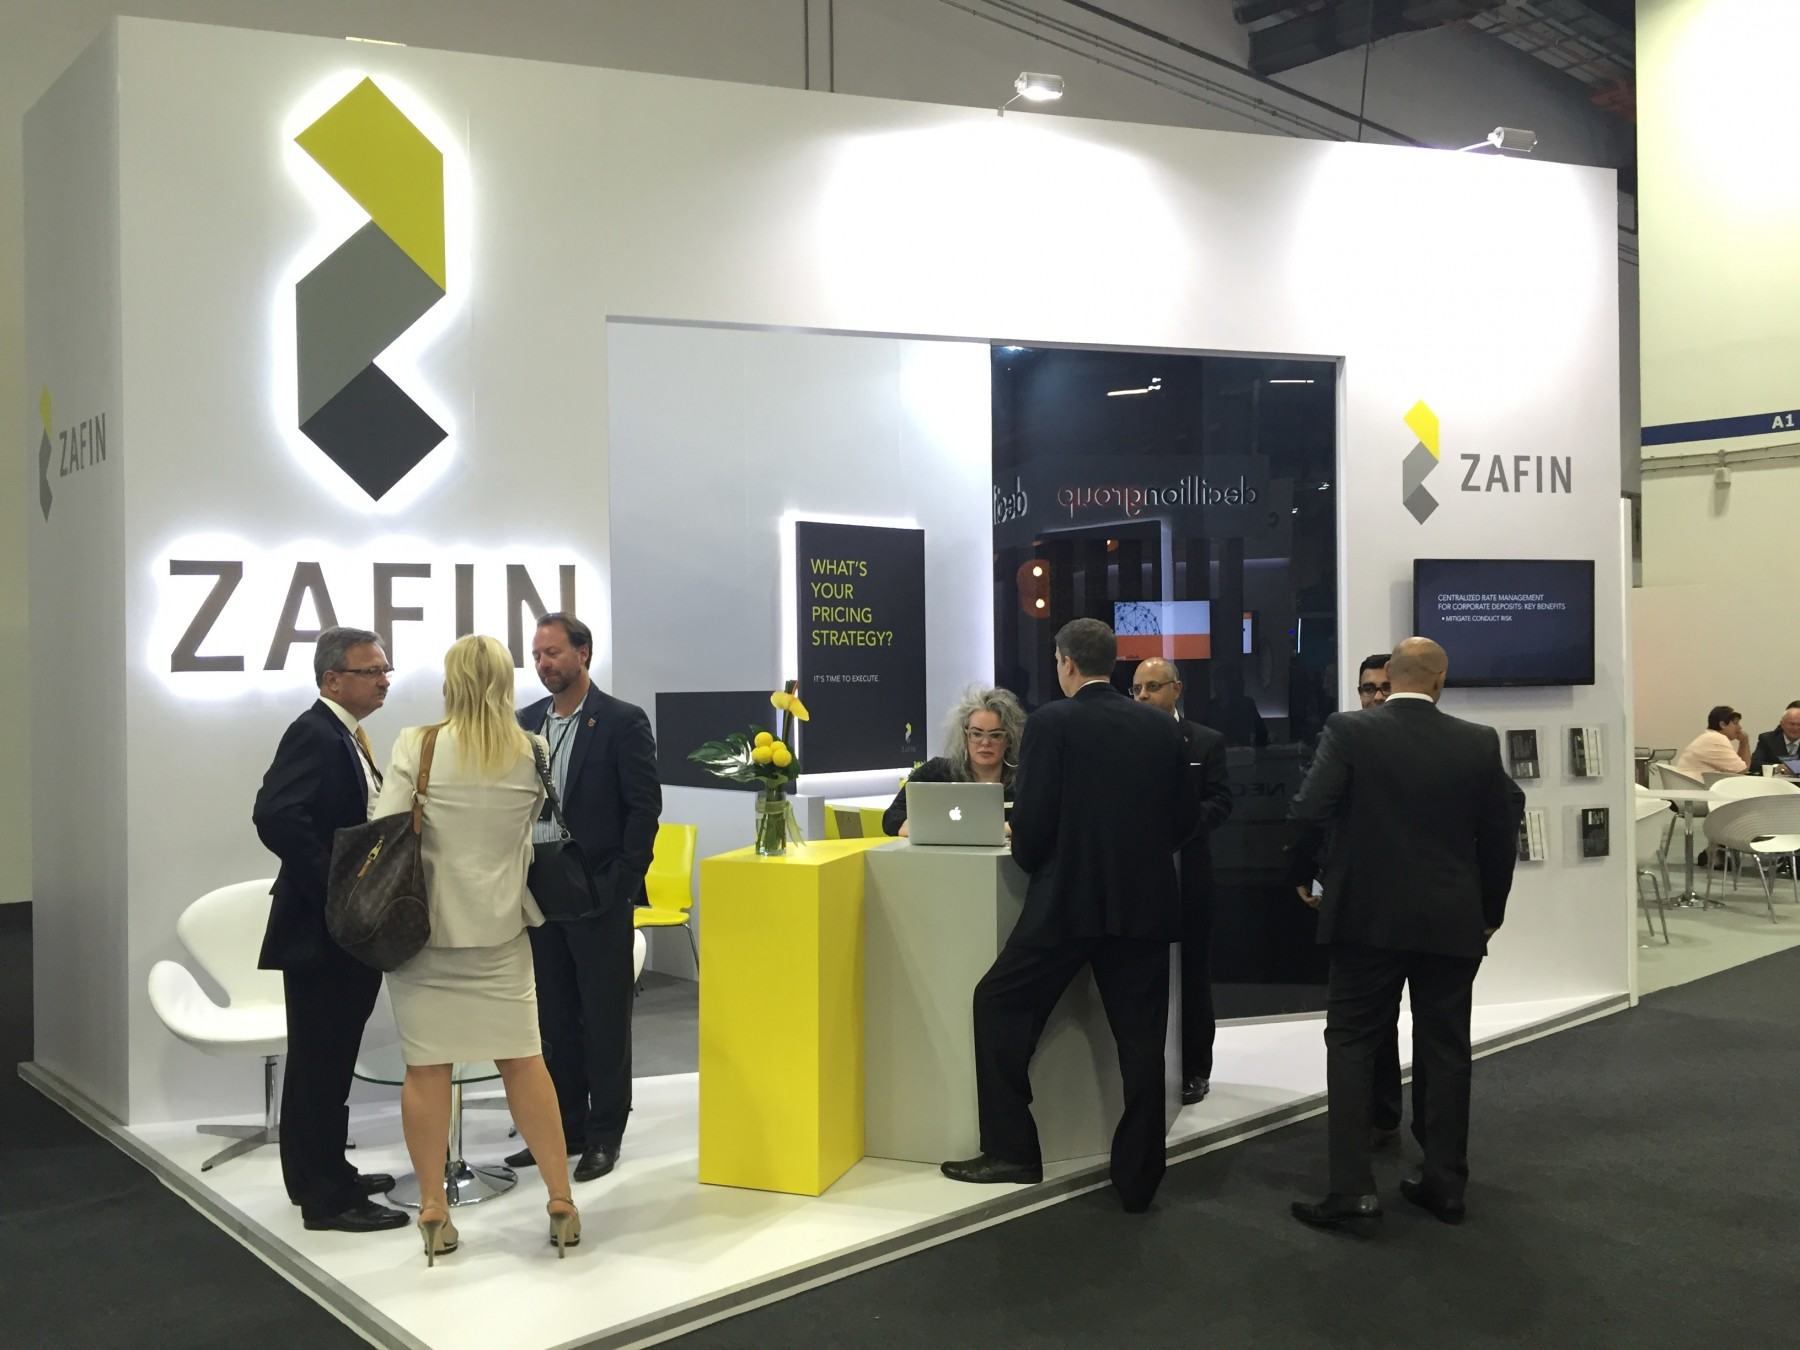 Accenture completes acquisition of Canadian firm Zafin